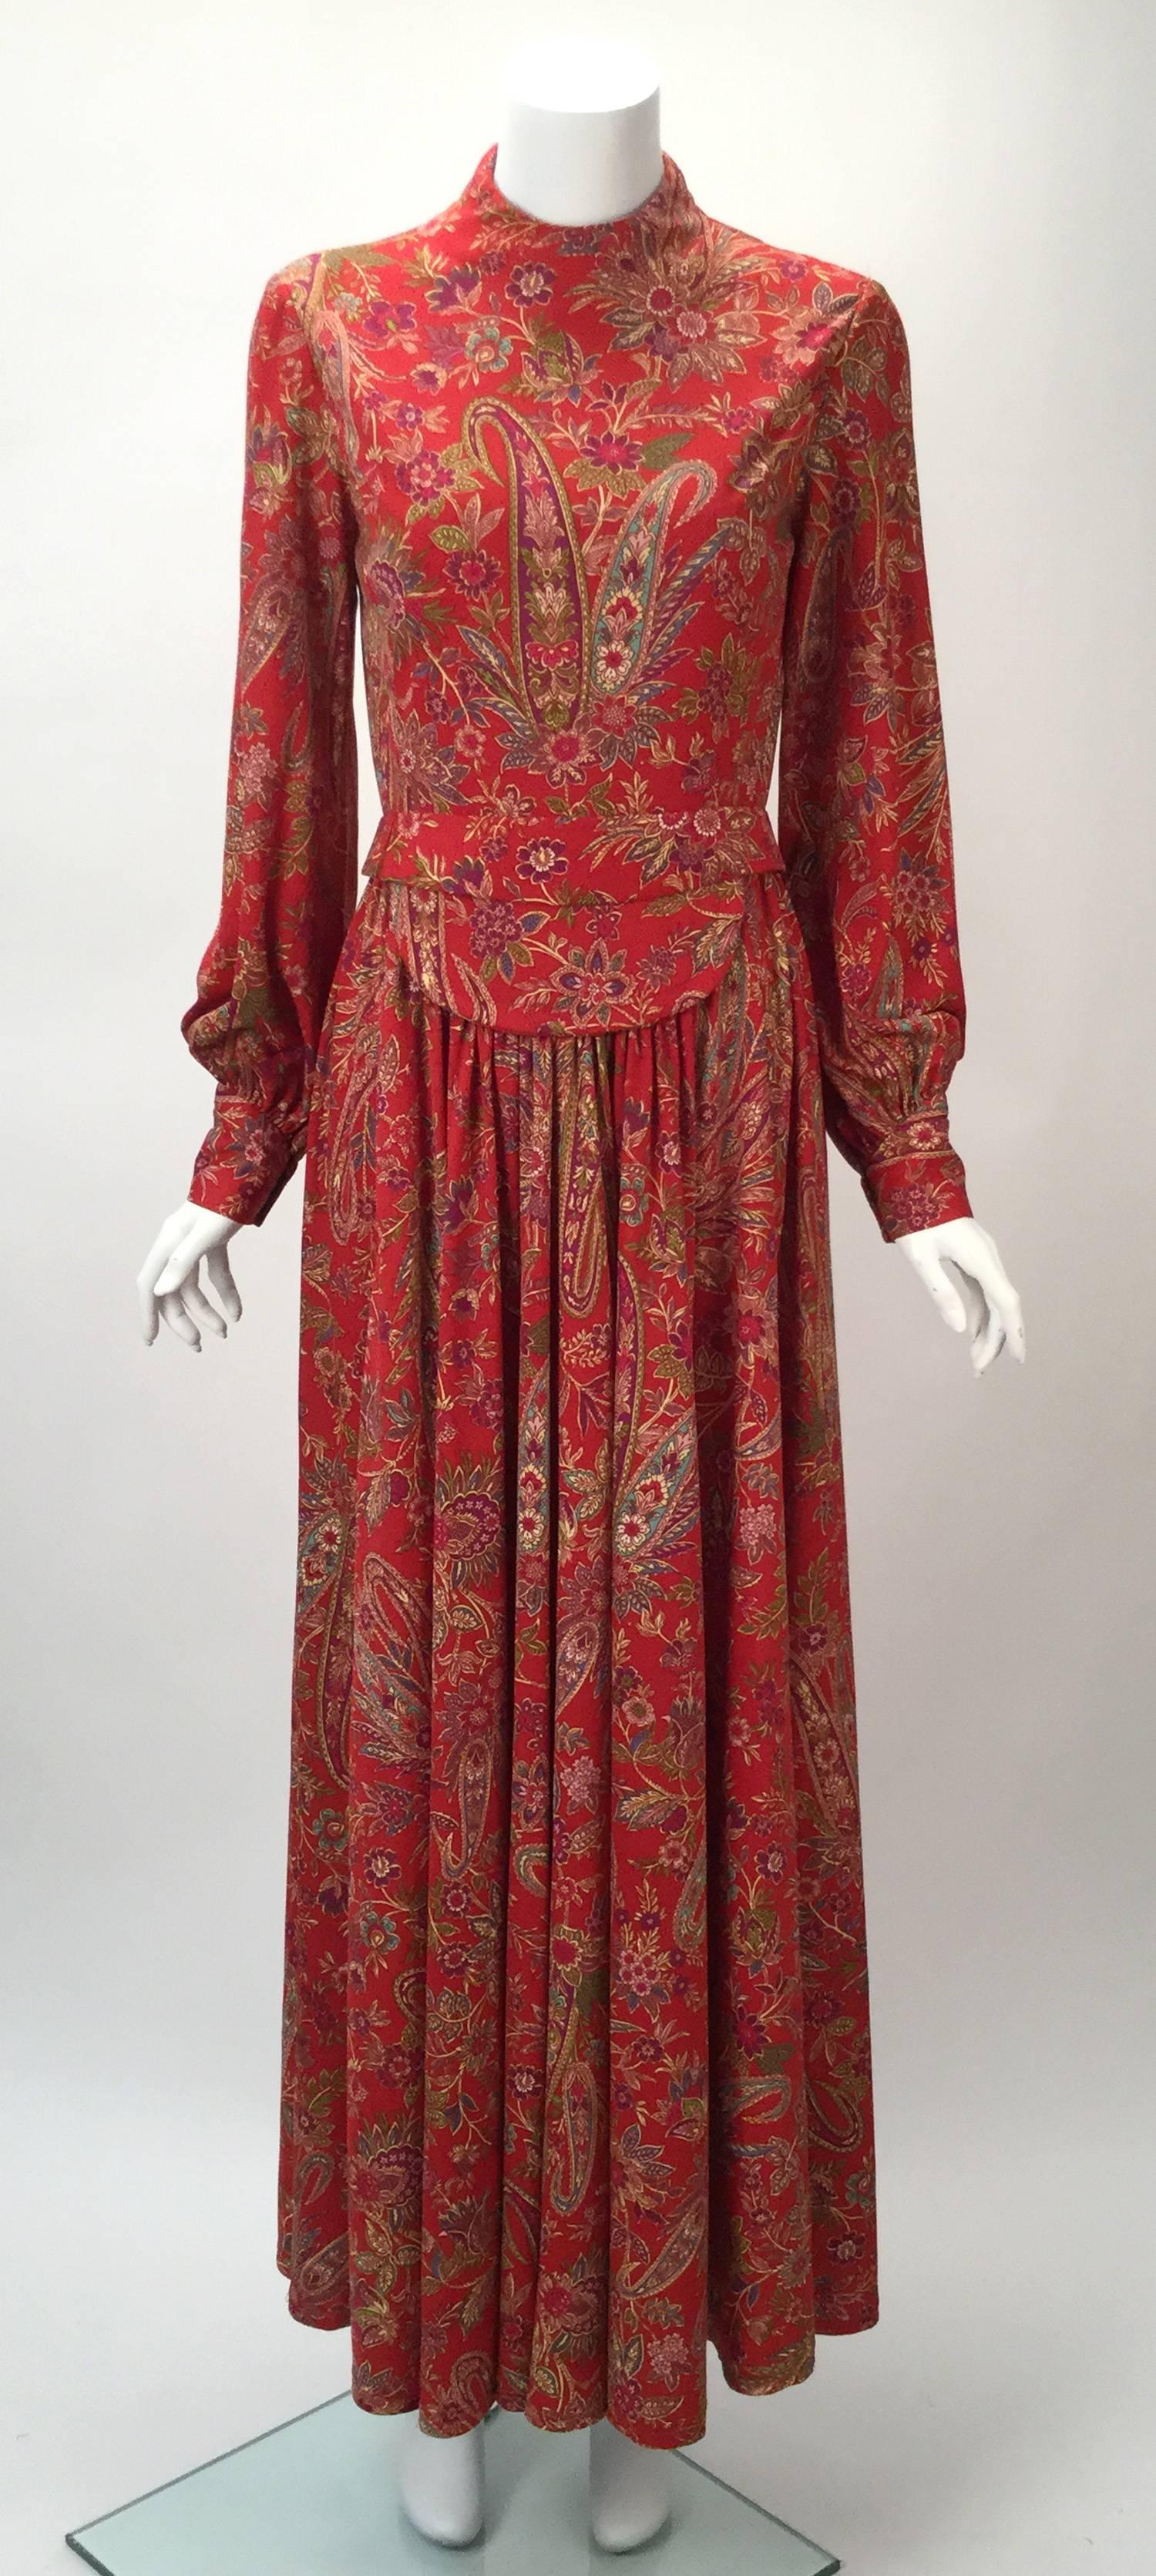 This 1960's Shannon Rodgers for Jerry Silverman maxi dress features a high neck and bishop sleeves. Front bib design detail. Bodice is lined.  Soft pleating falls from waist. Zipper running center back. Belt in the same paisley print. The ends are